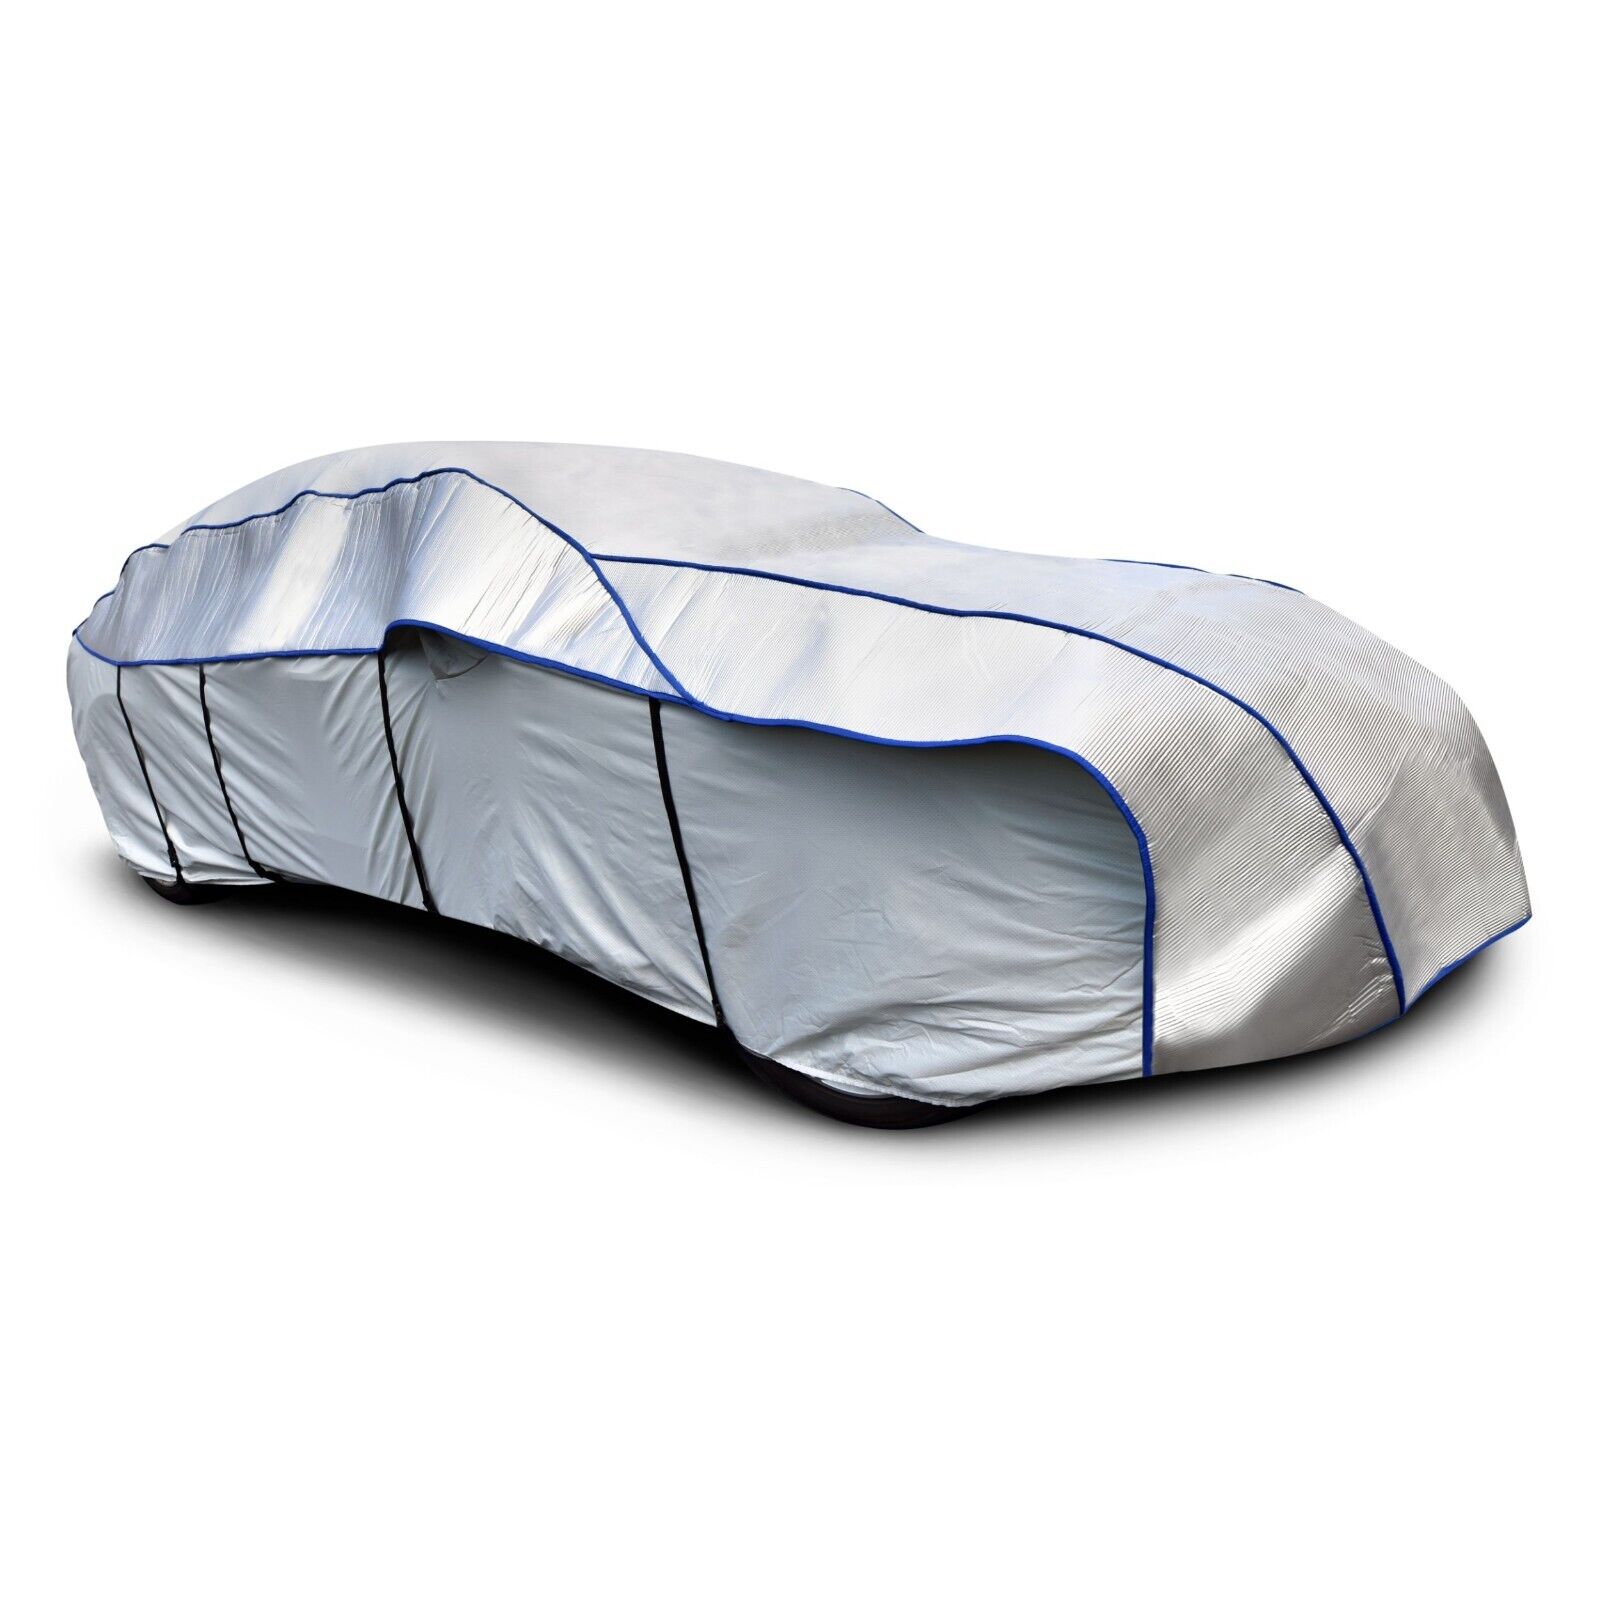 Budge Hail Jacket Hail Cover, Hail Protection for Cars, Multiple Sizes